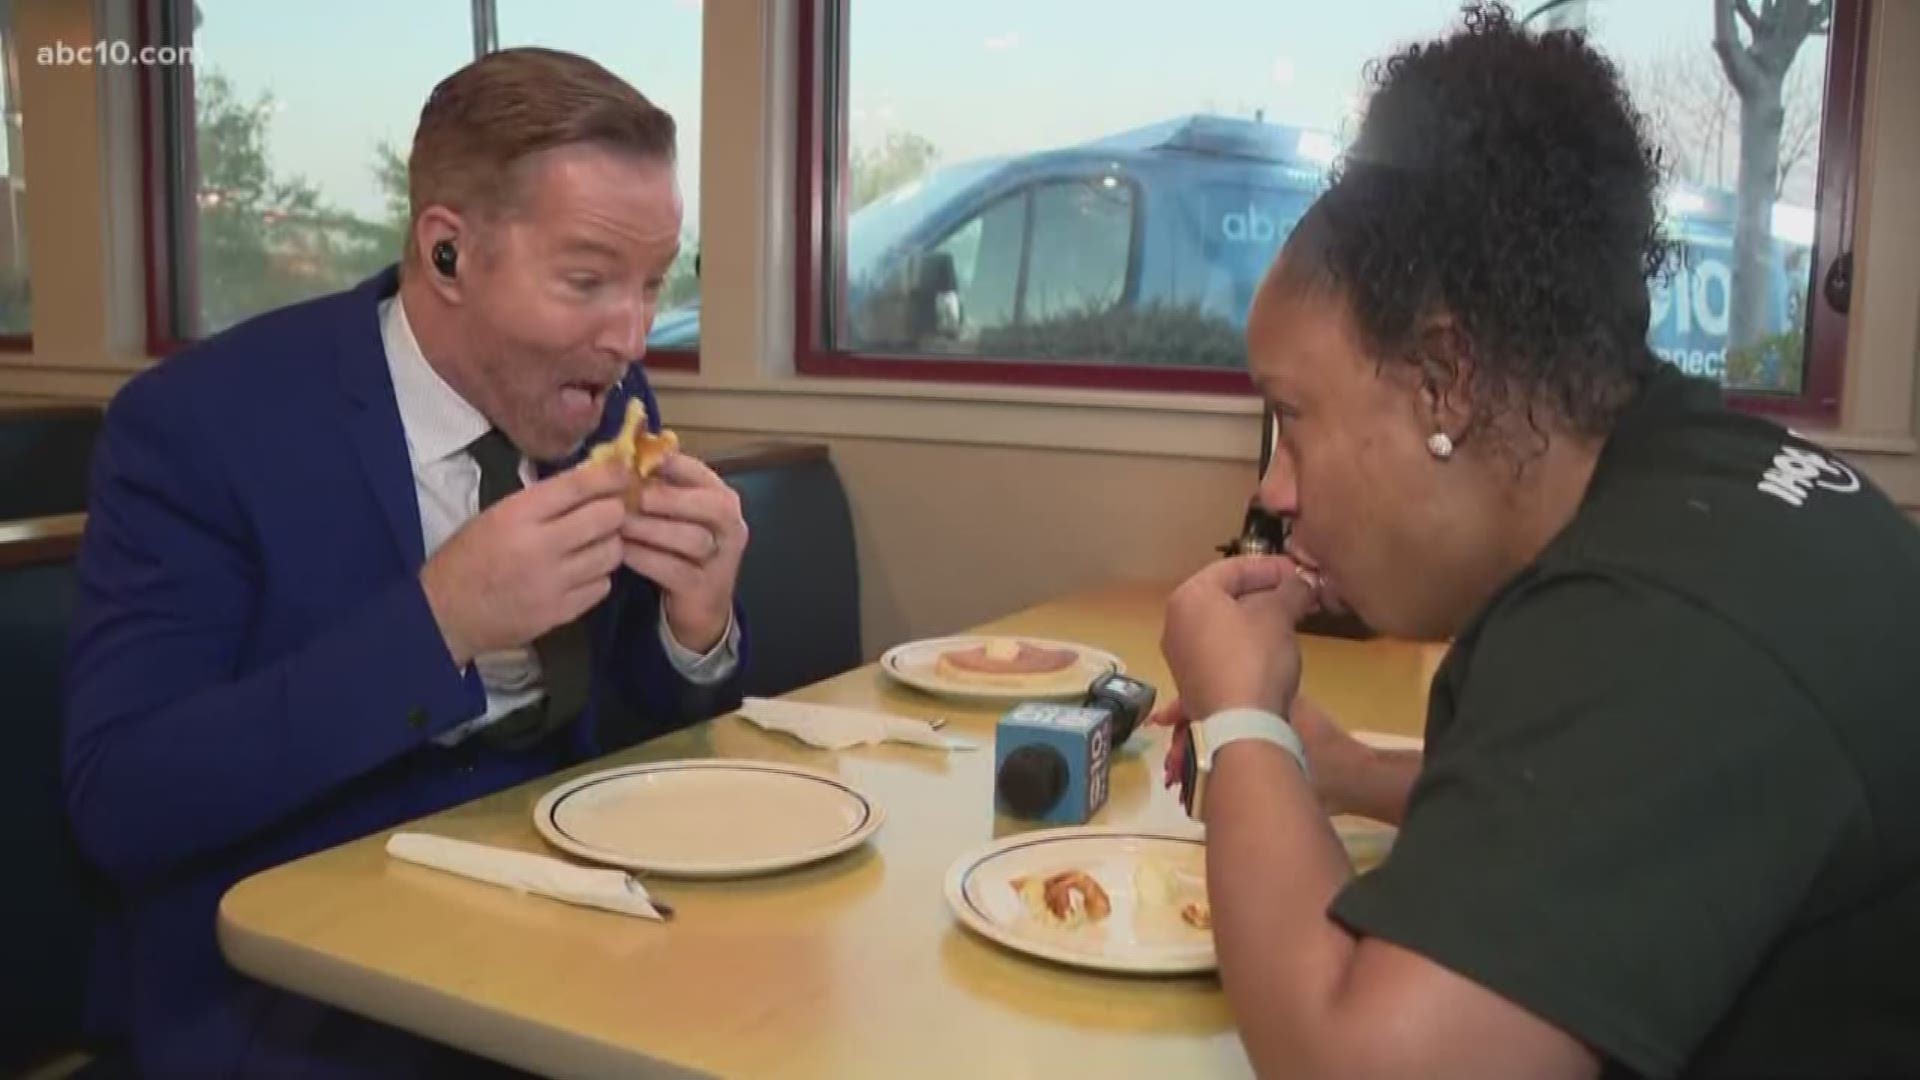 For National Pancake Day at IHOP, Mark S. Allen challenged a diner to a pancake eating contest. It did not go well for Mark.